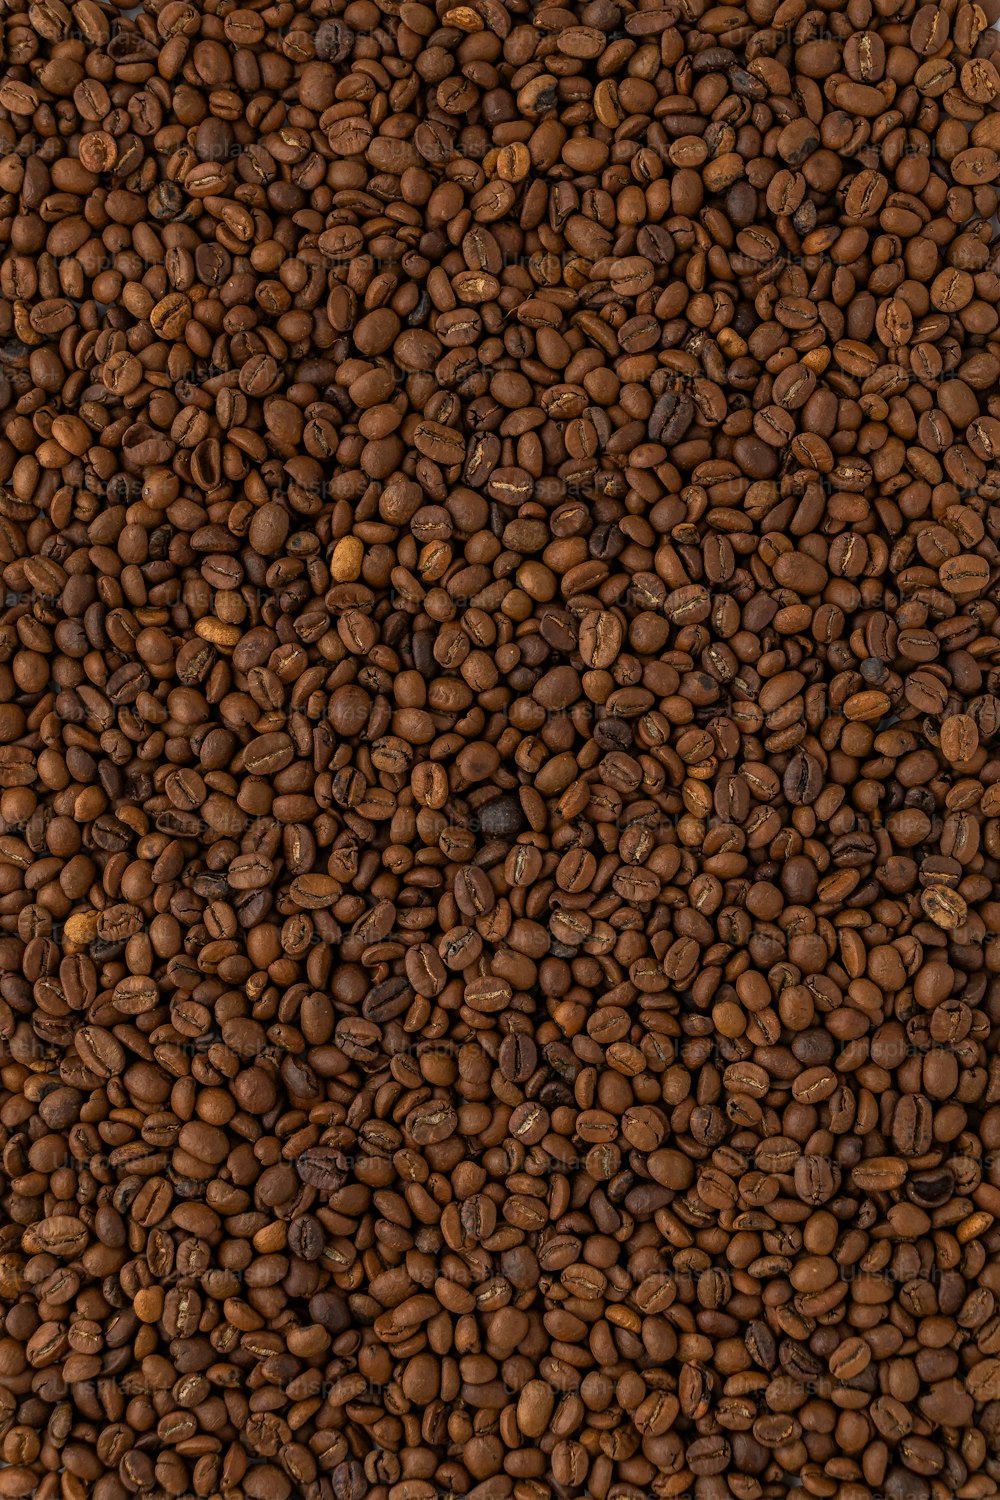 a pile of coffee beans is shown in this image